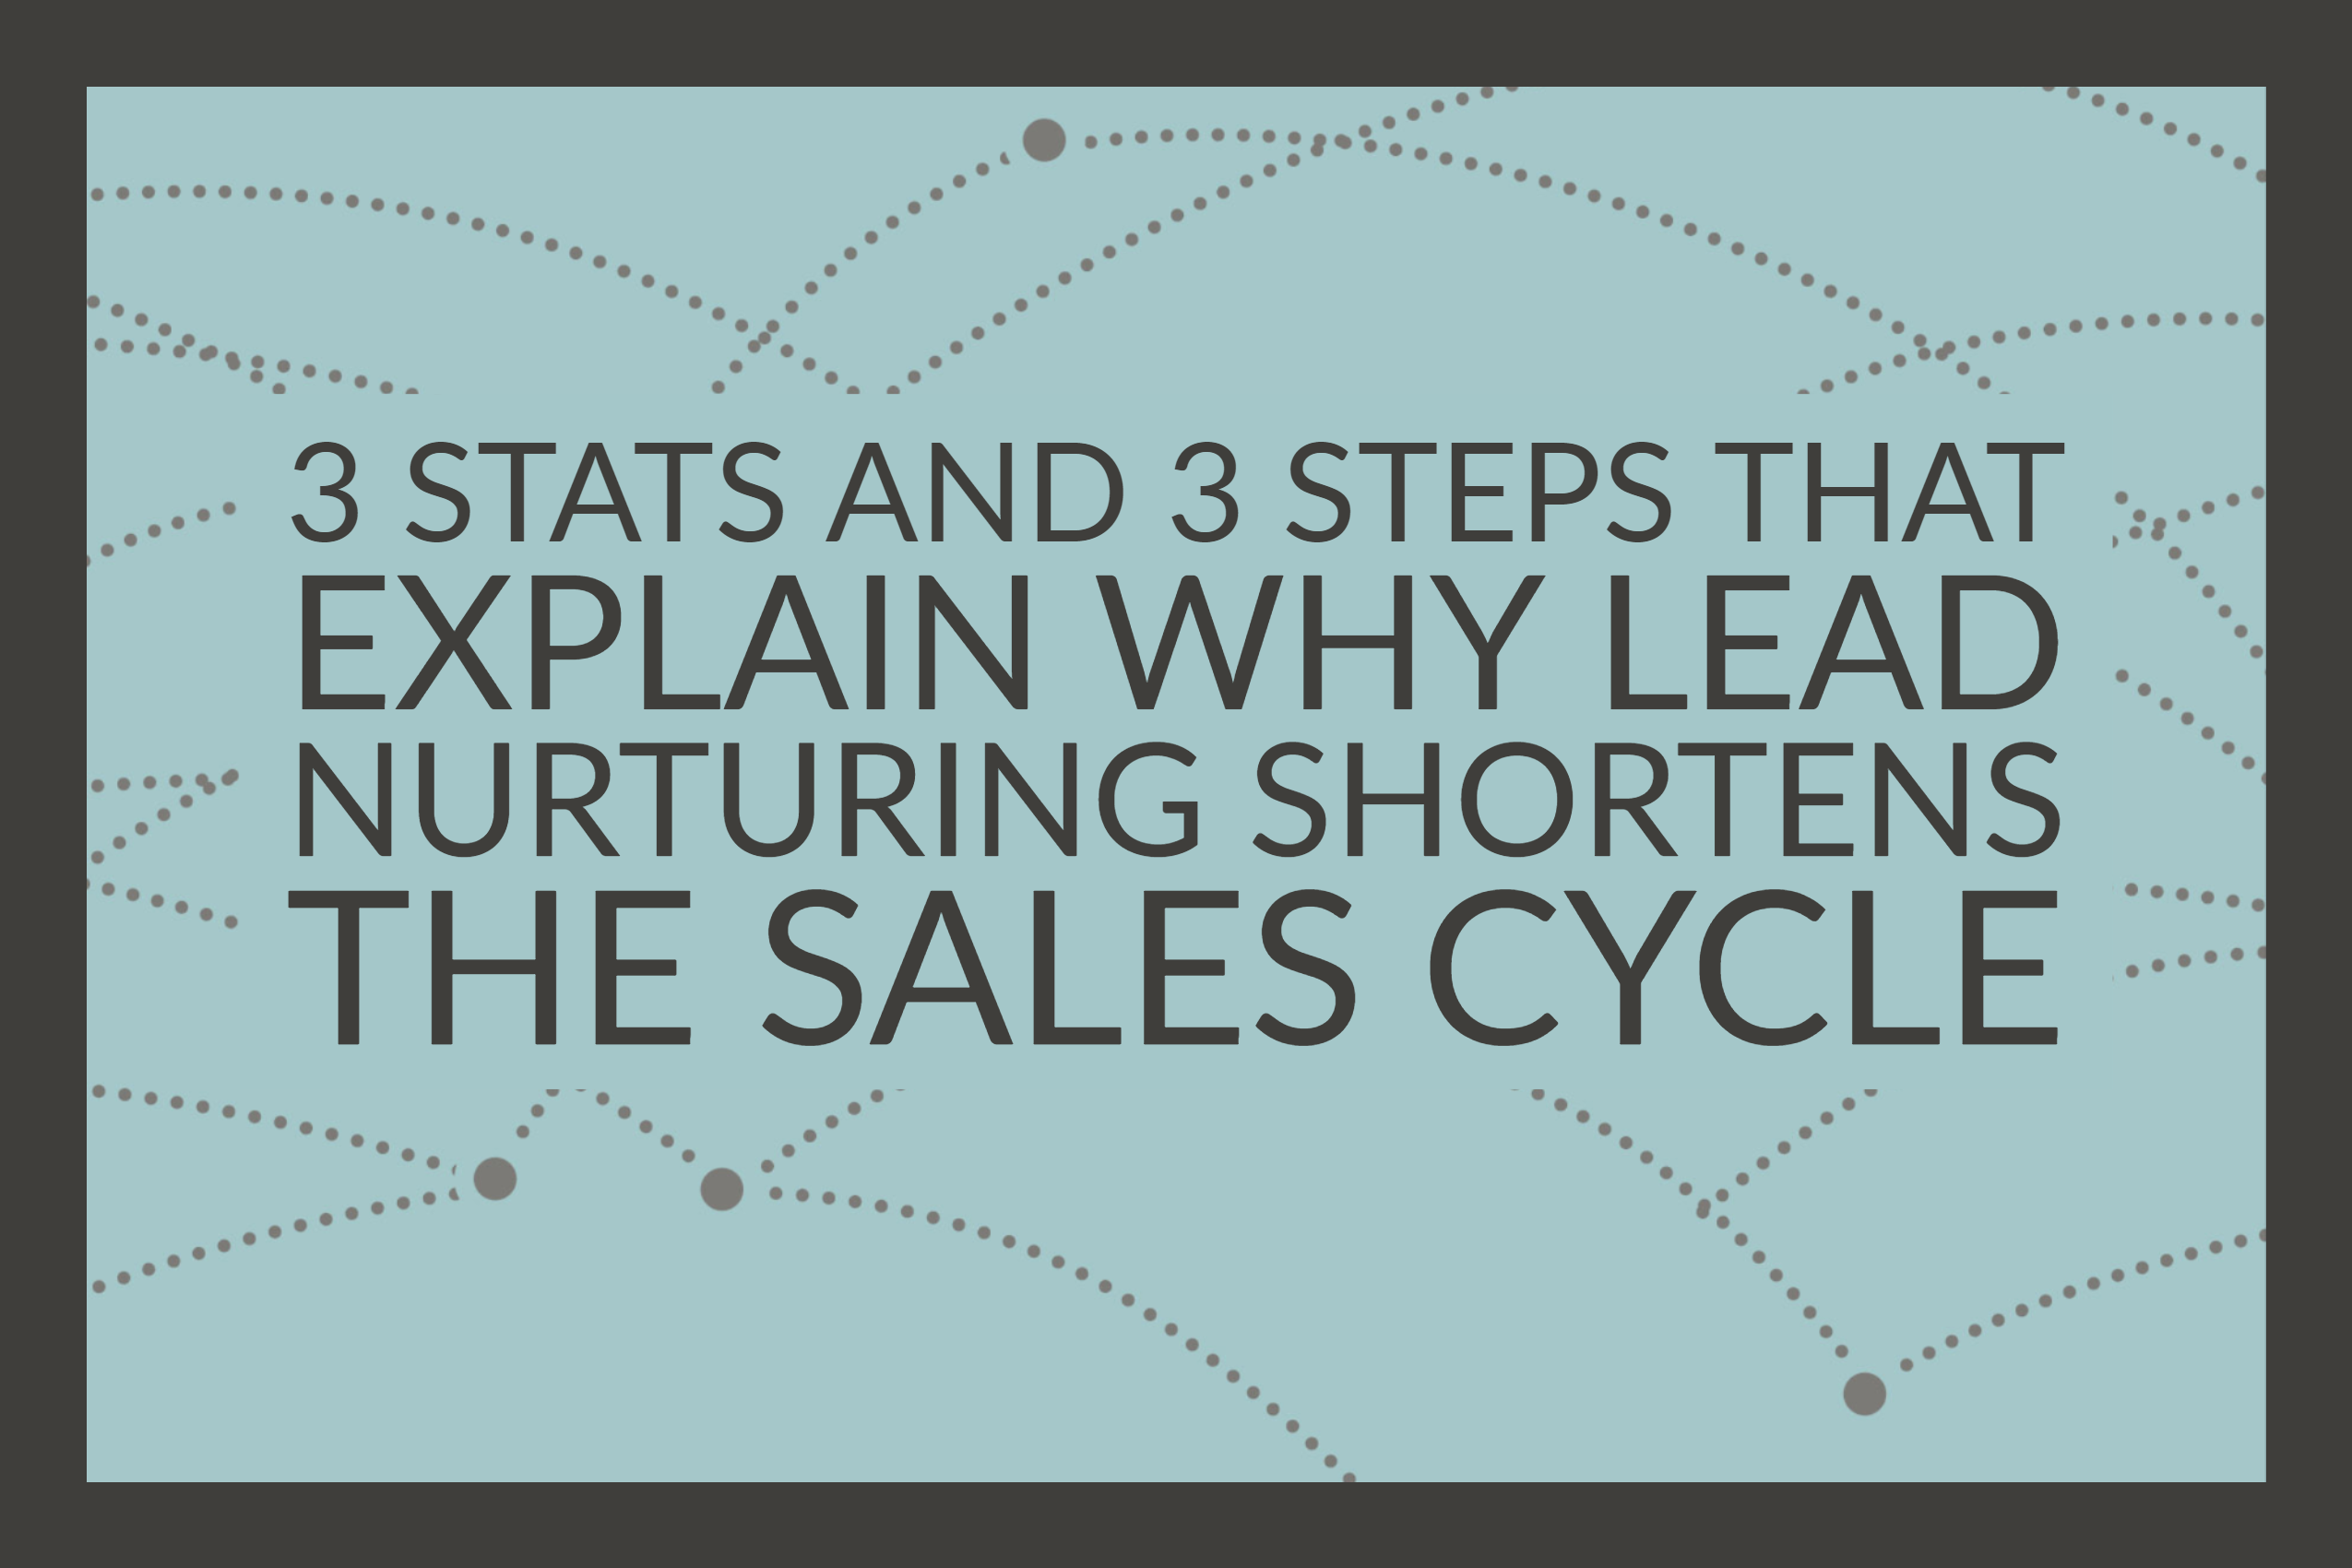 3 Stats and 3 Steps That Explain Why Lead Nurturing Shortens The Sales Cycle